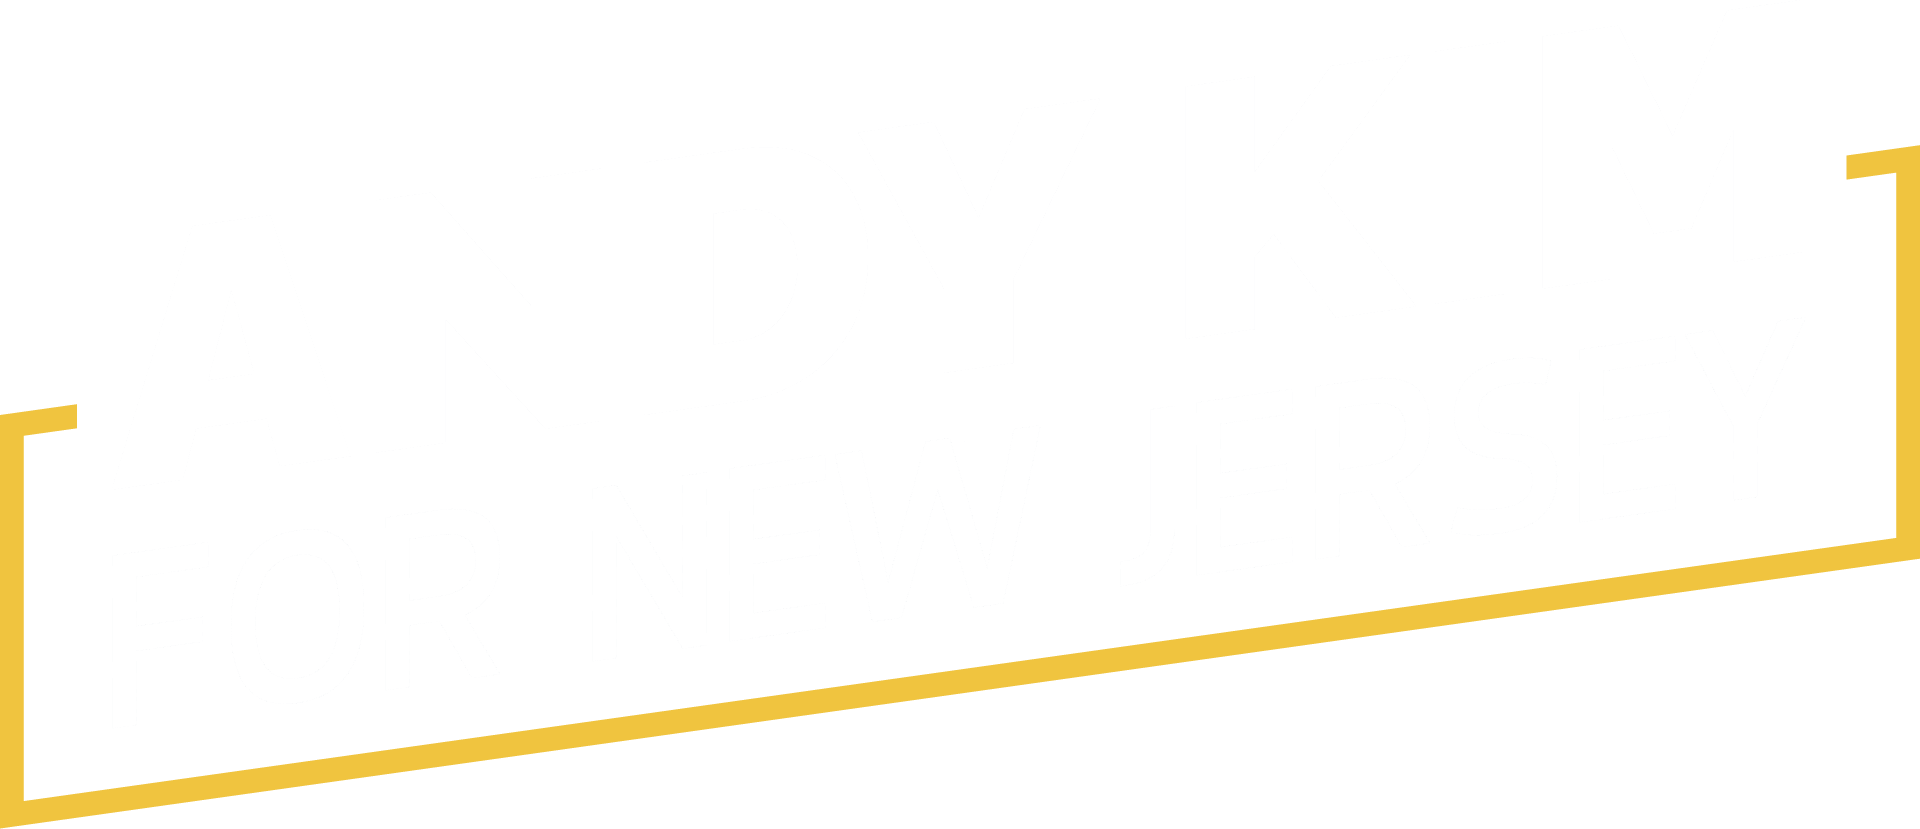 Andy Kim for New Jersey